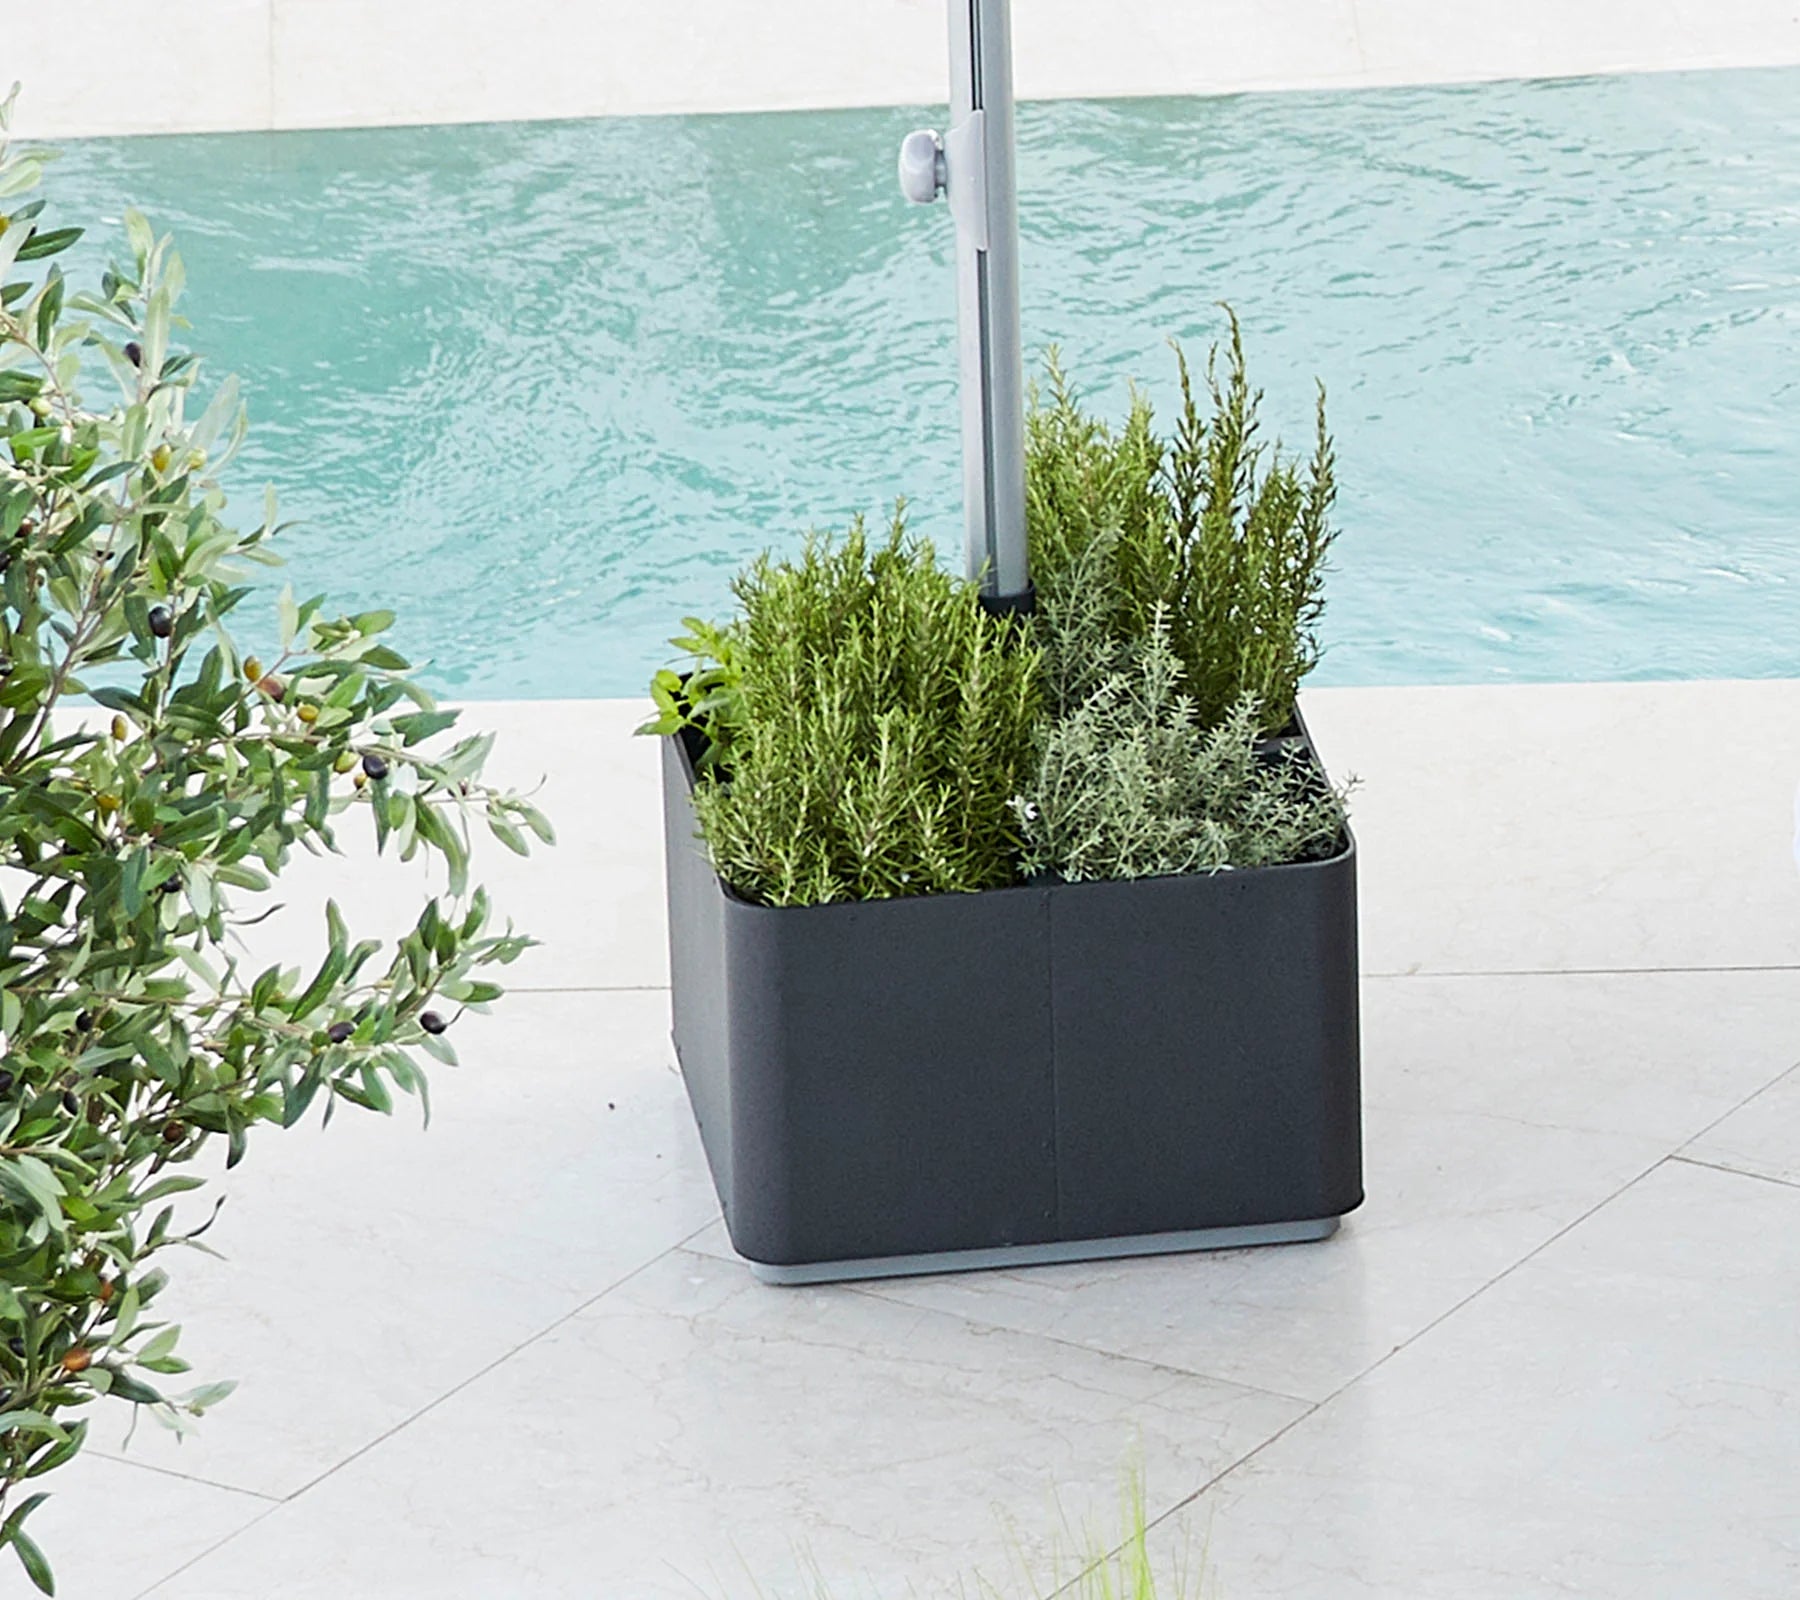 Boxhill's Grow Umbrella Base and Planter Box with Wheels lifestyle image at poolside